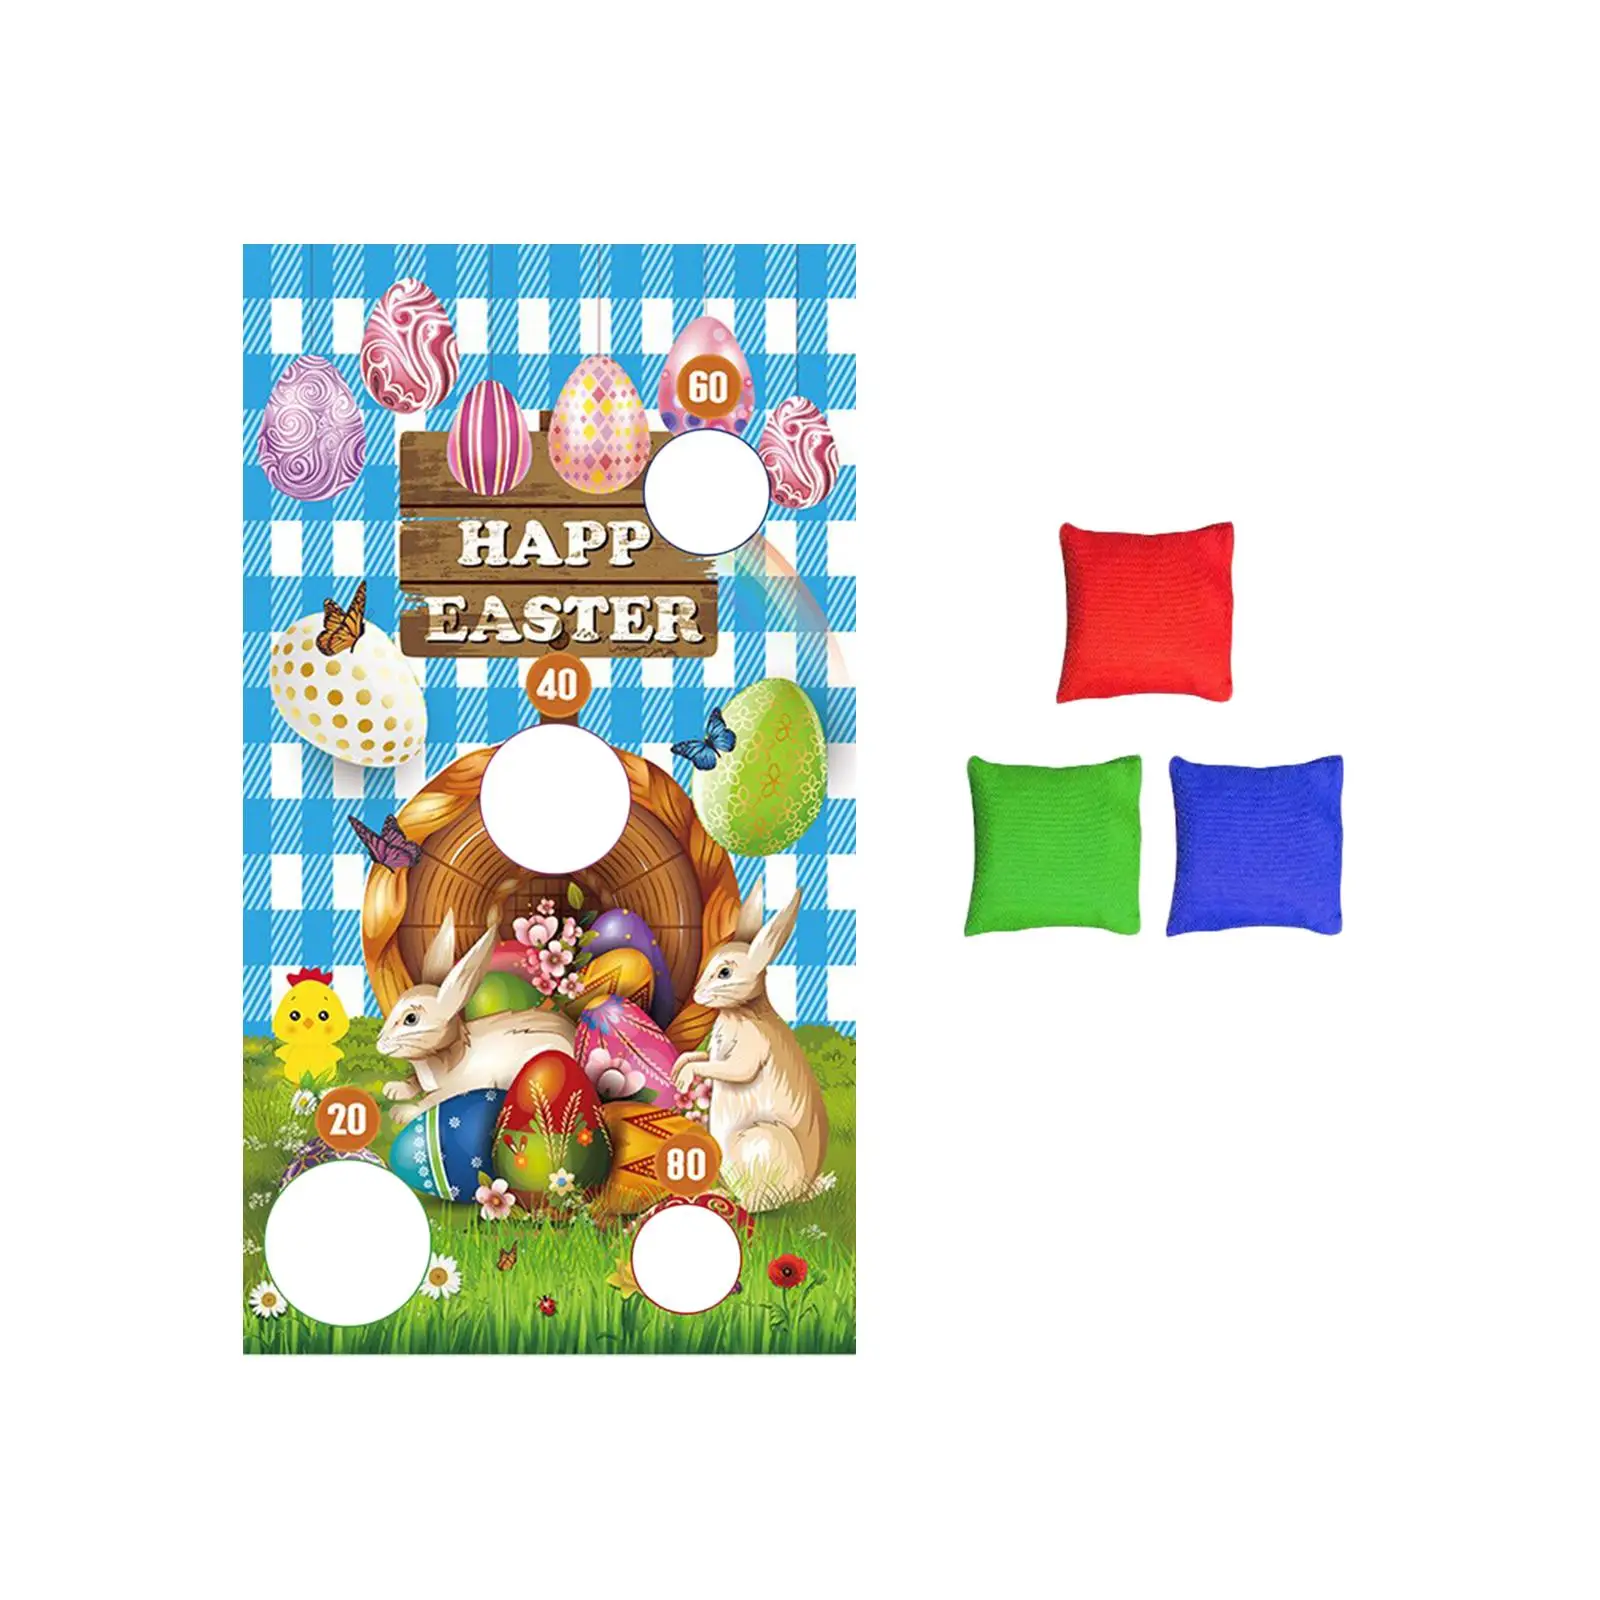 Toss Game Easter Day Banner Easter Gifts Easter Decor Summer Party Favors Toys Fun Camping Indoor and Outdoor with 3 Bean Bags